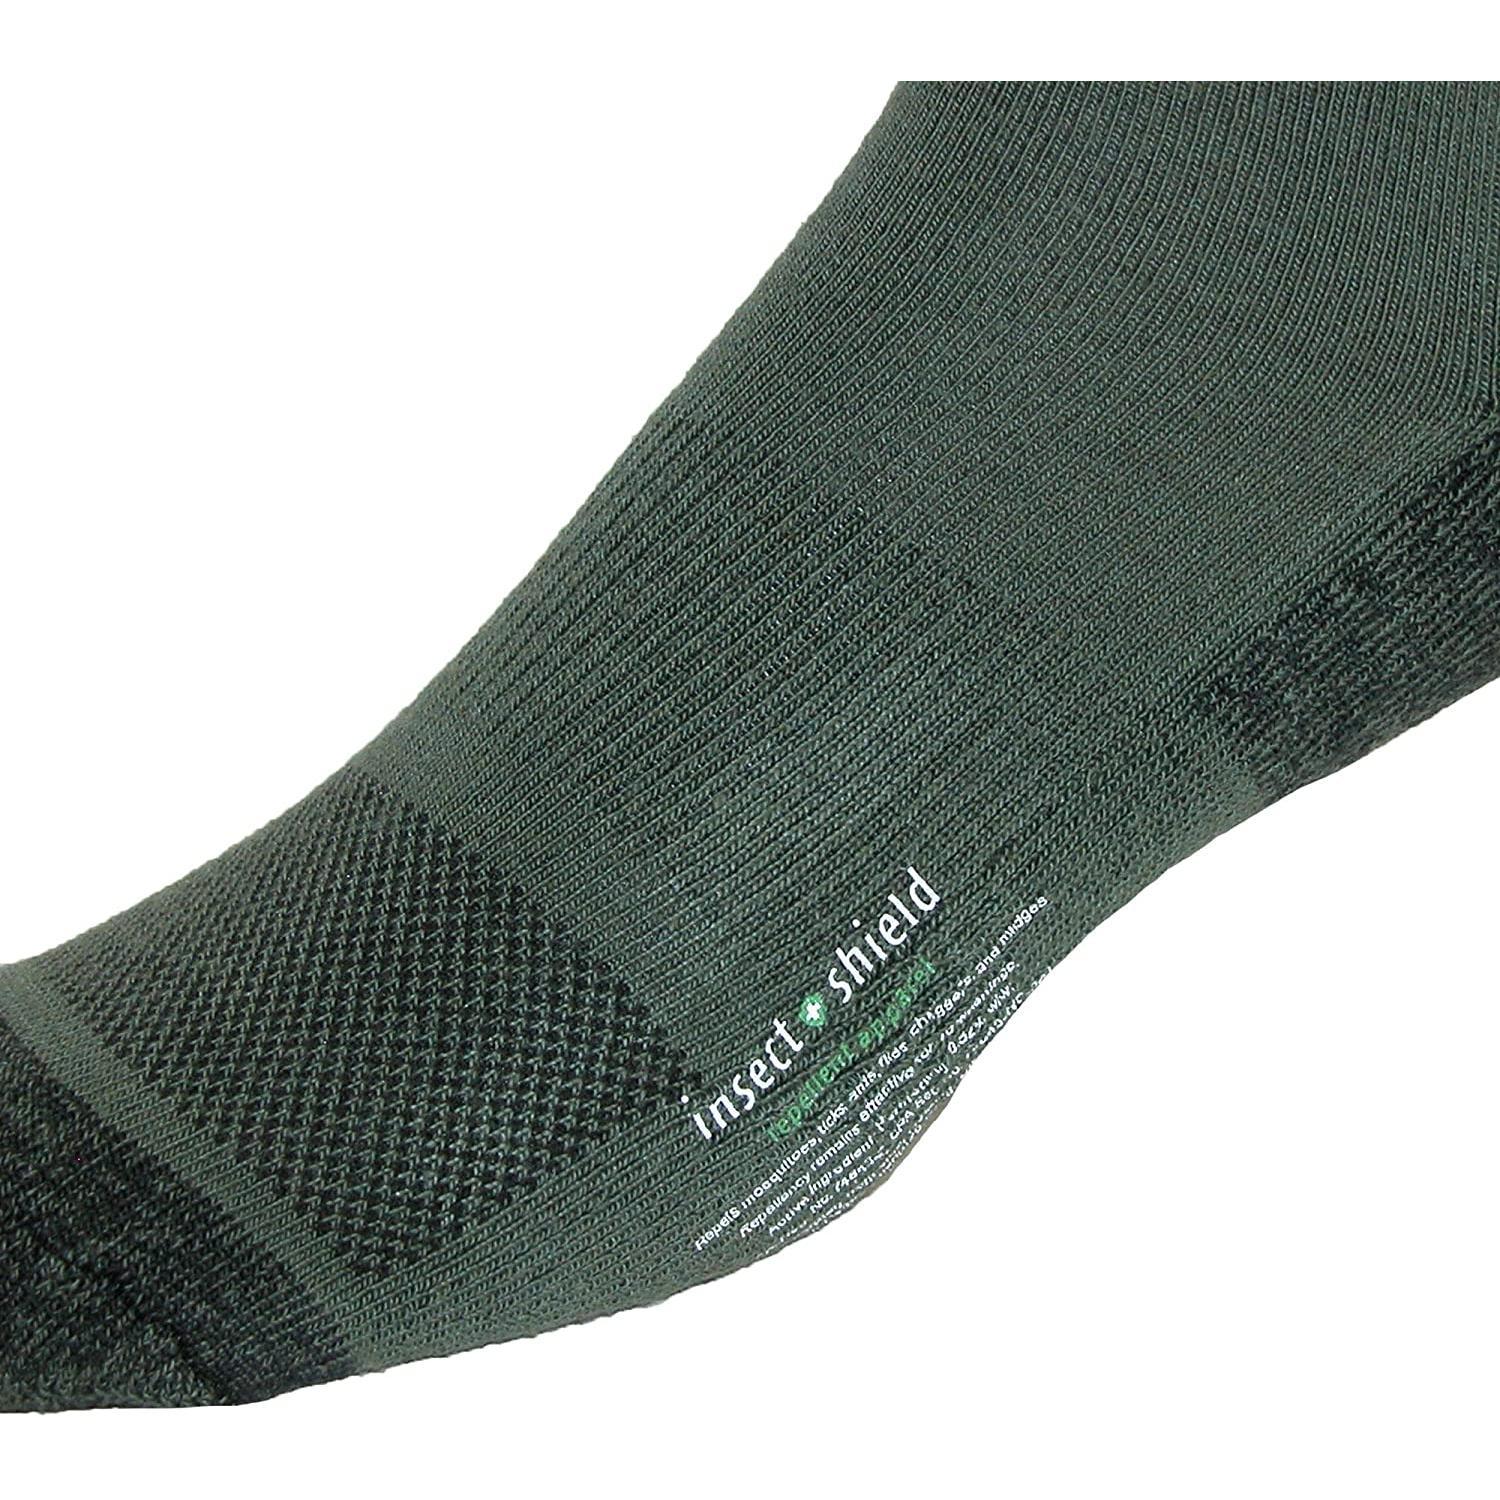 REALTREE Insect Adult Shield Crew Socks